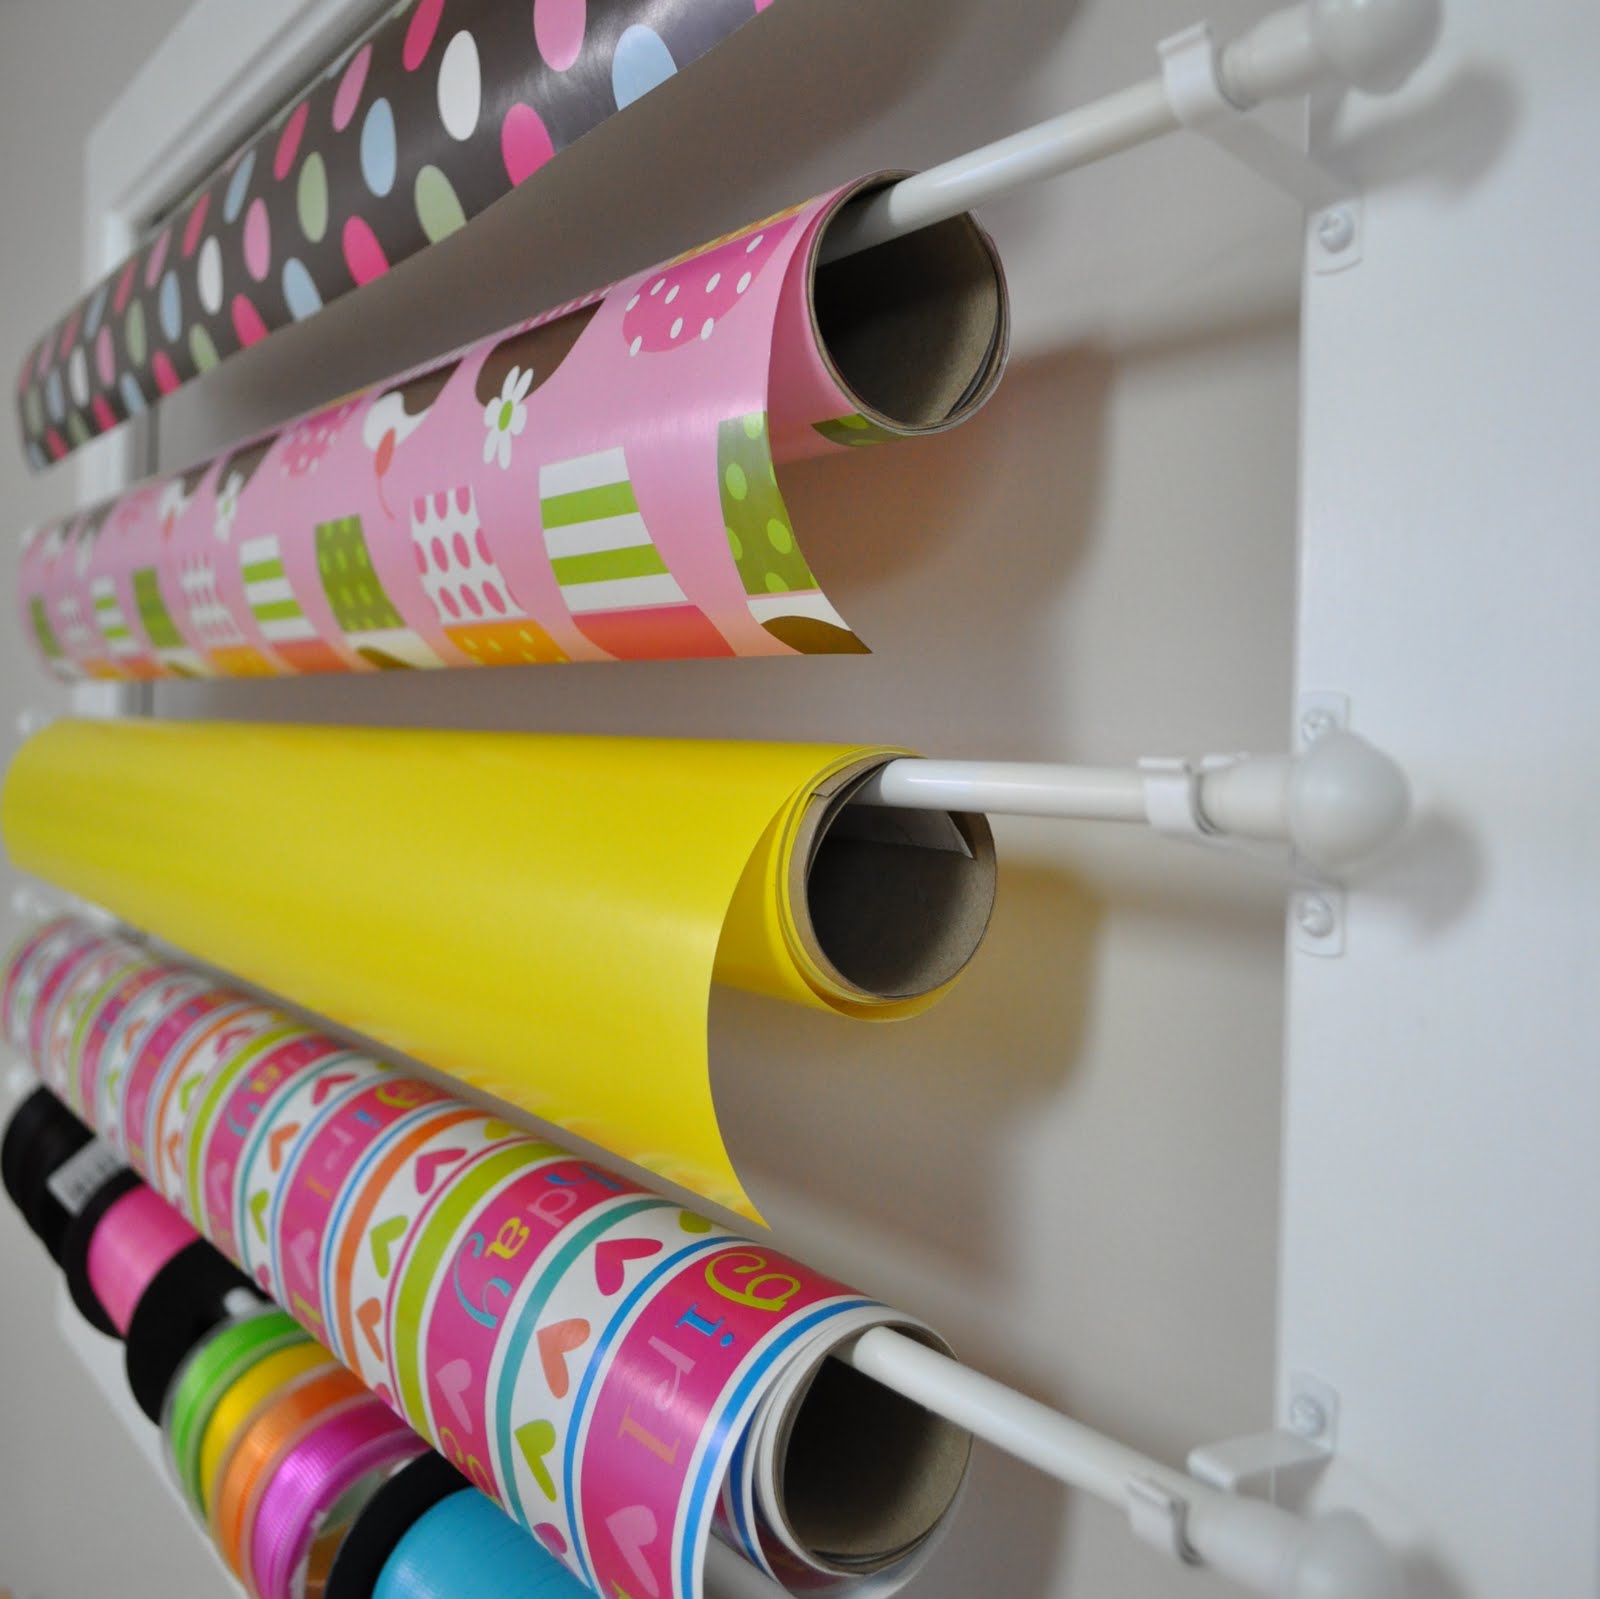  Slice of Lime Wrapping Paper  and Ribbon  Wall  Rack